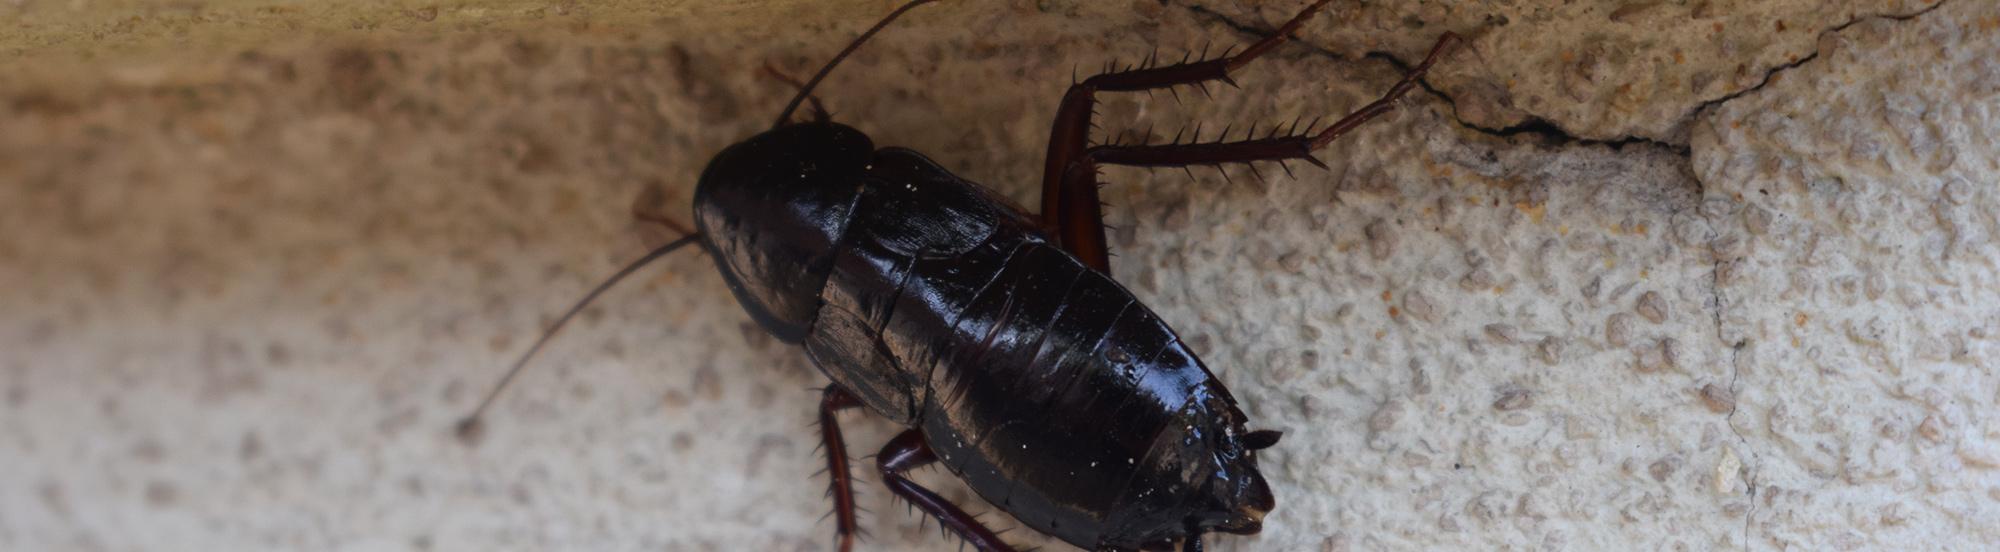 oriental cockroach outside of a house